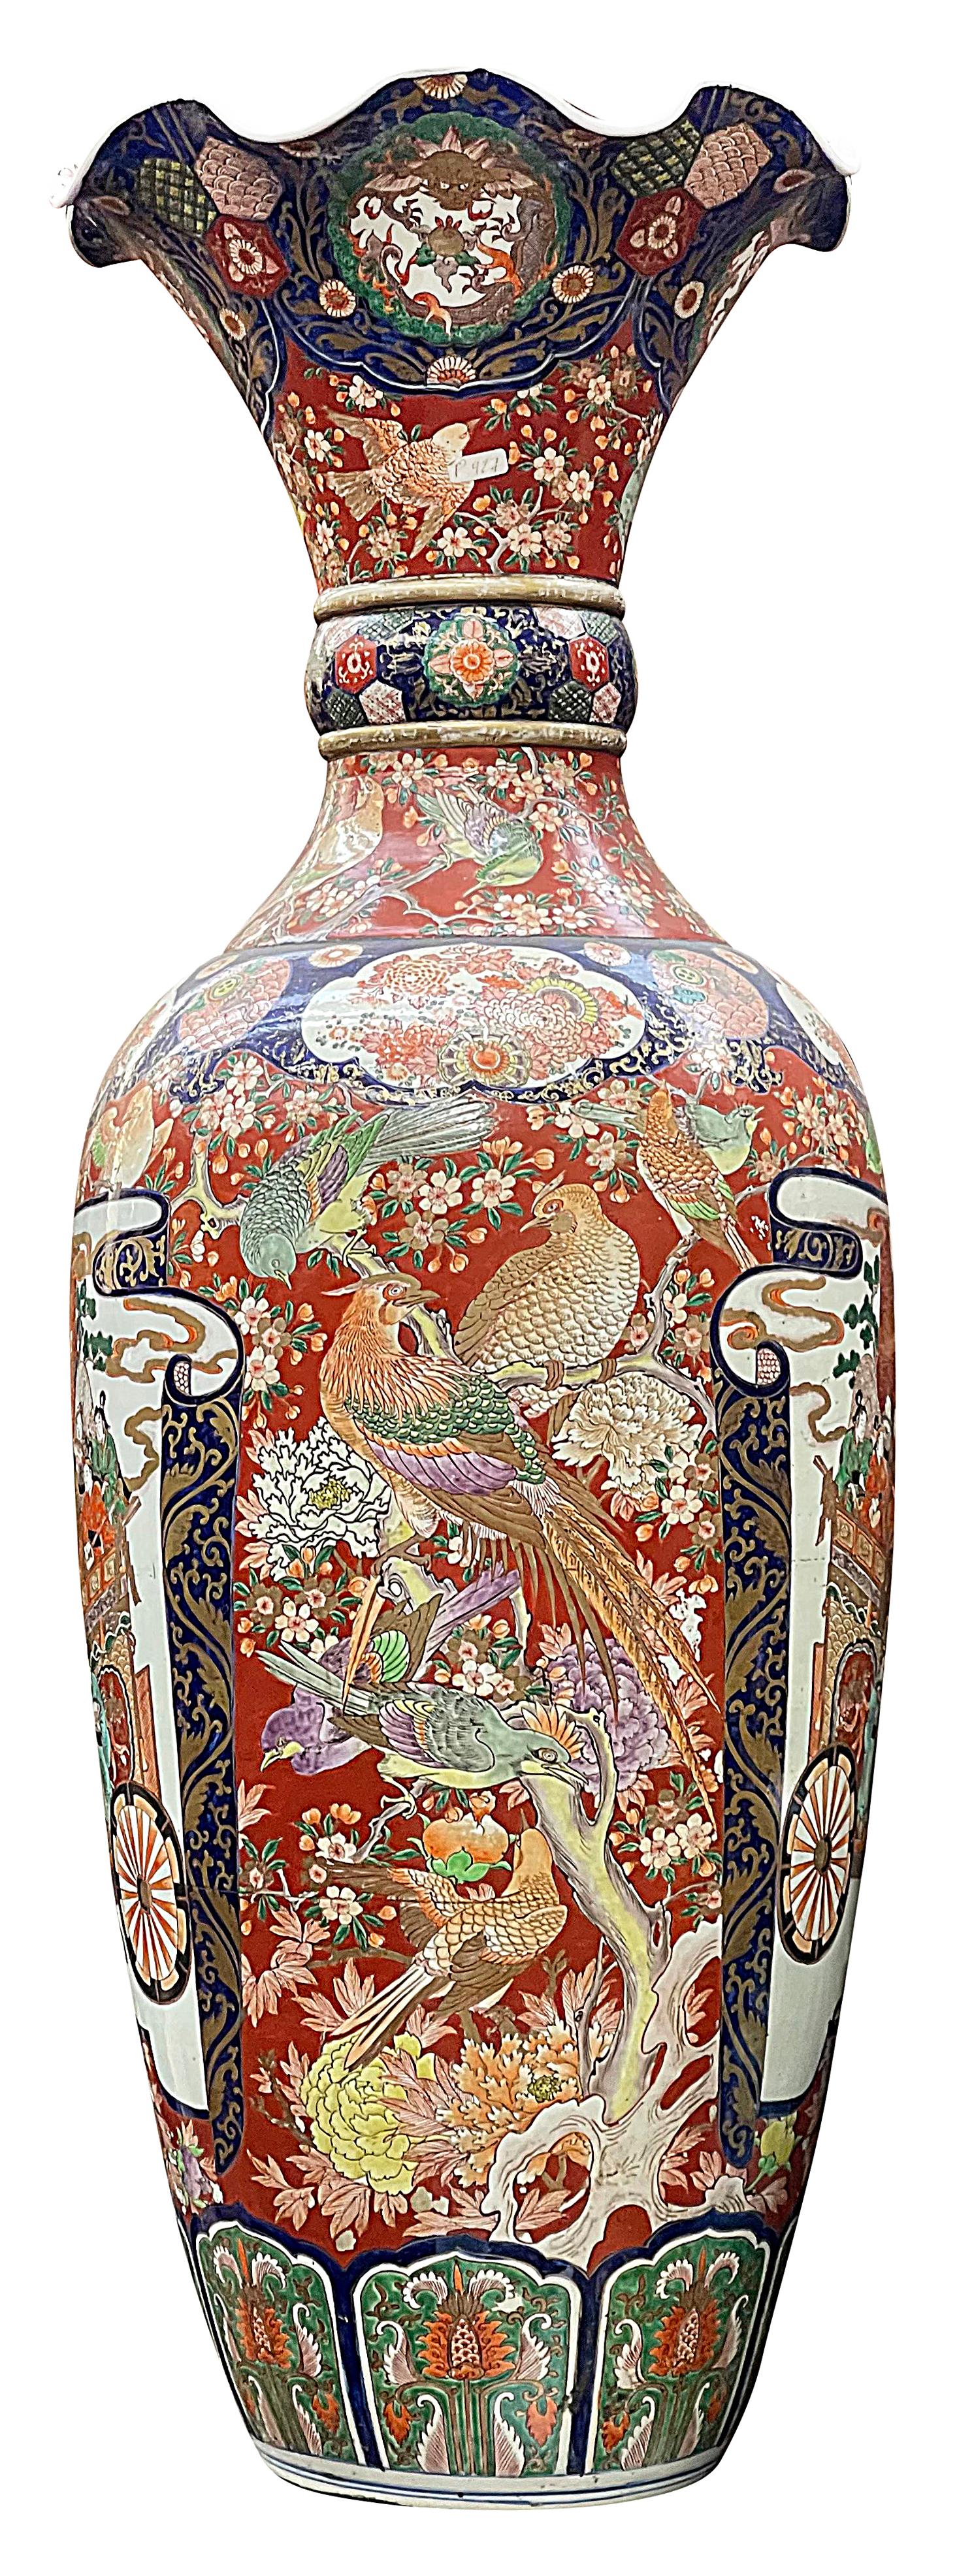 A very impressive late 19th Century Japanese Imari vase, with wonderful bold colouring, a scalloped rim classical motif decoration to the boarders, exotic flowers and birds, foliage, mythical creatures. Inset hand painted panels depicting various